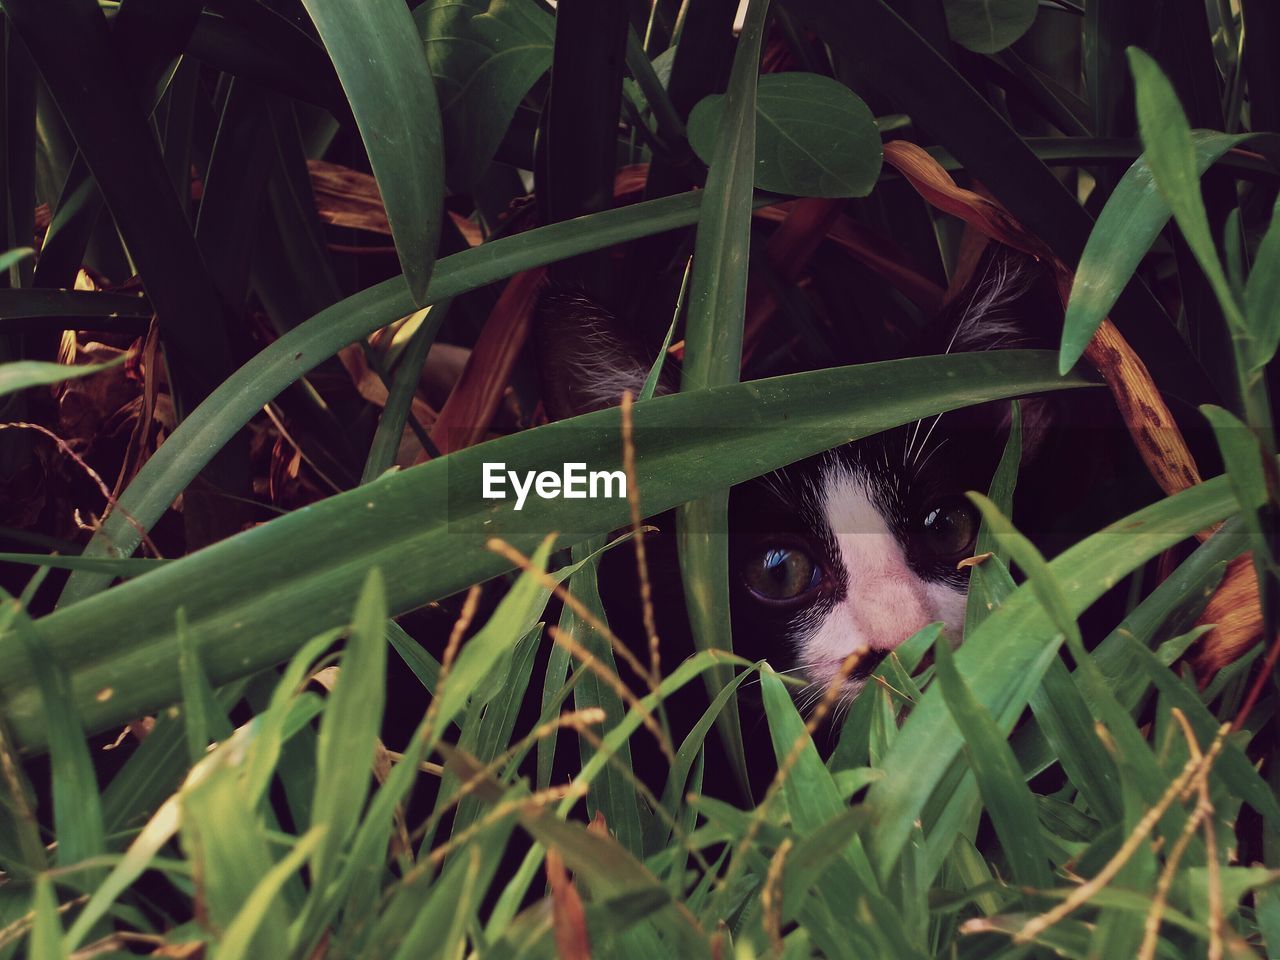 Close-up portrait of cat amidst plants on field